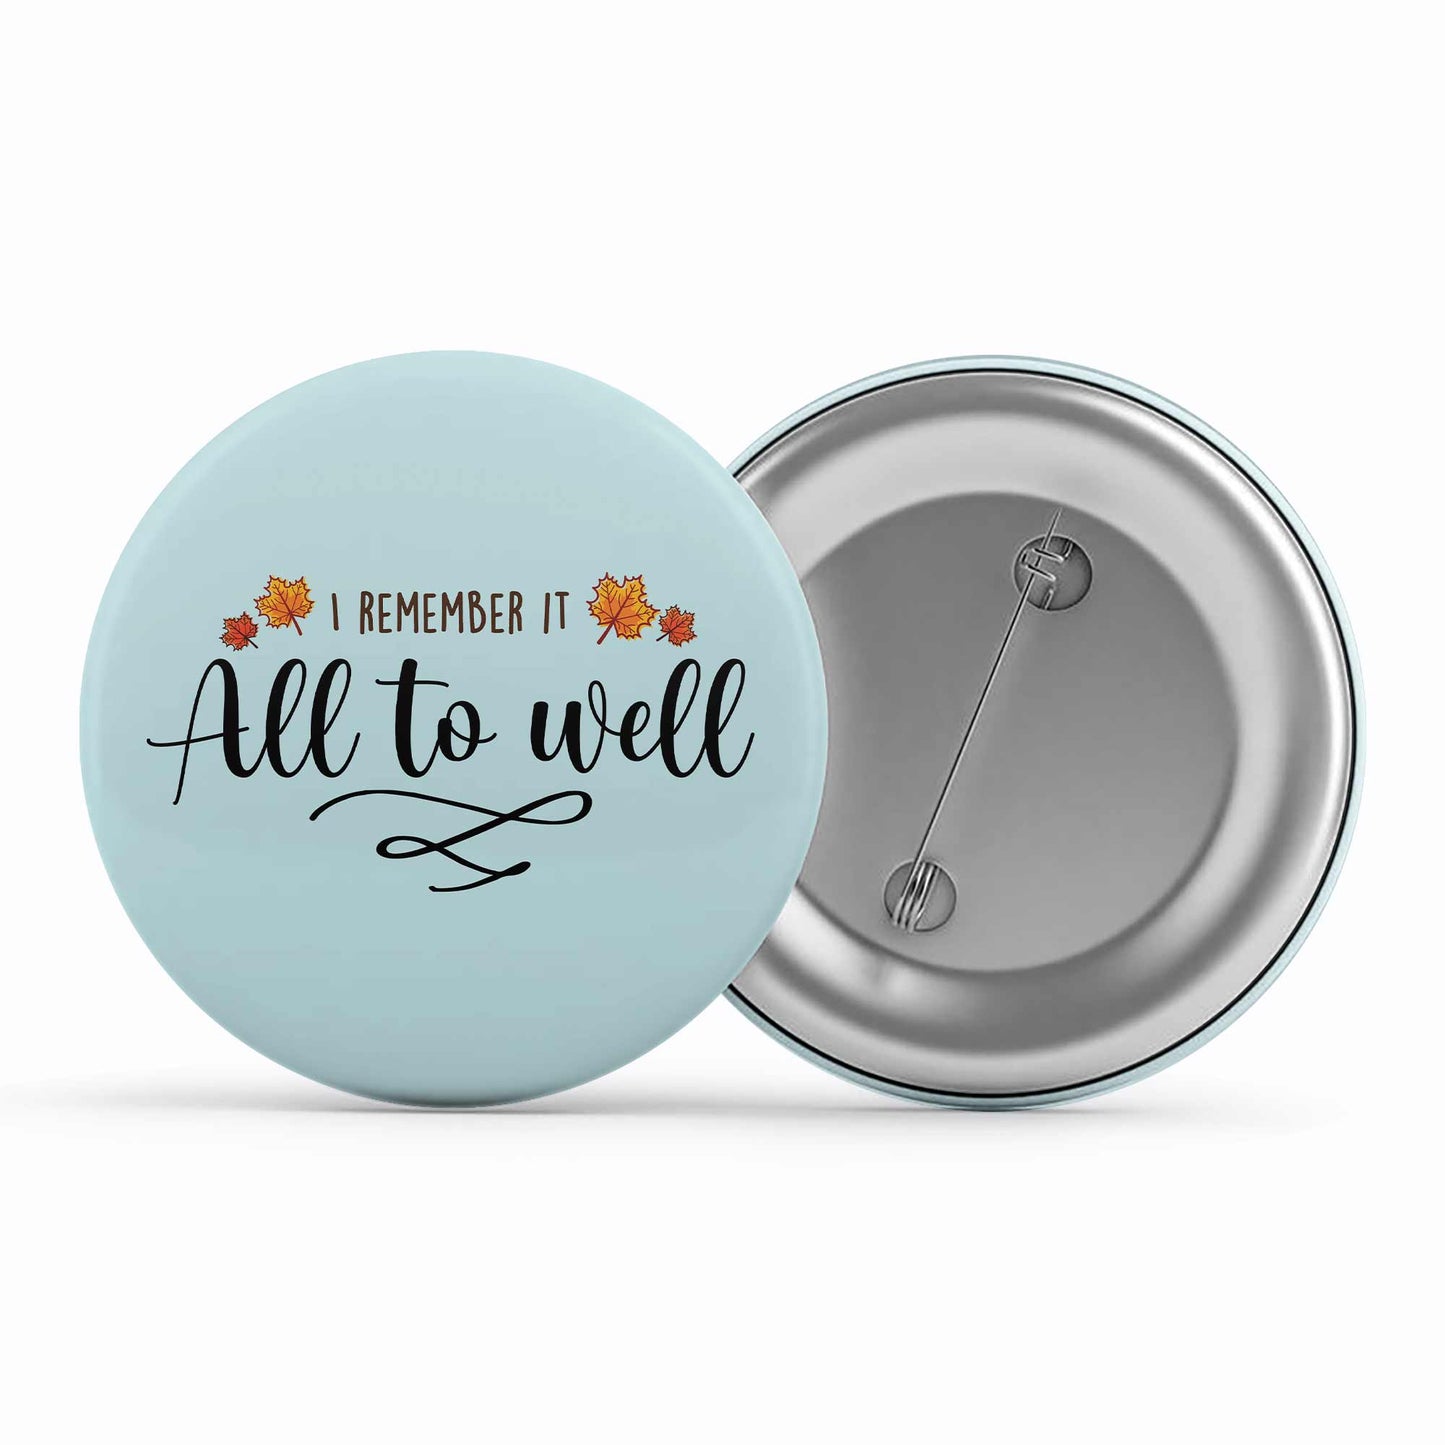 taylor swift all too well badge pin button music band buy online india the banyan tee tbt men women girls boys unisex